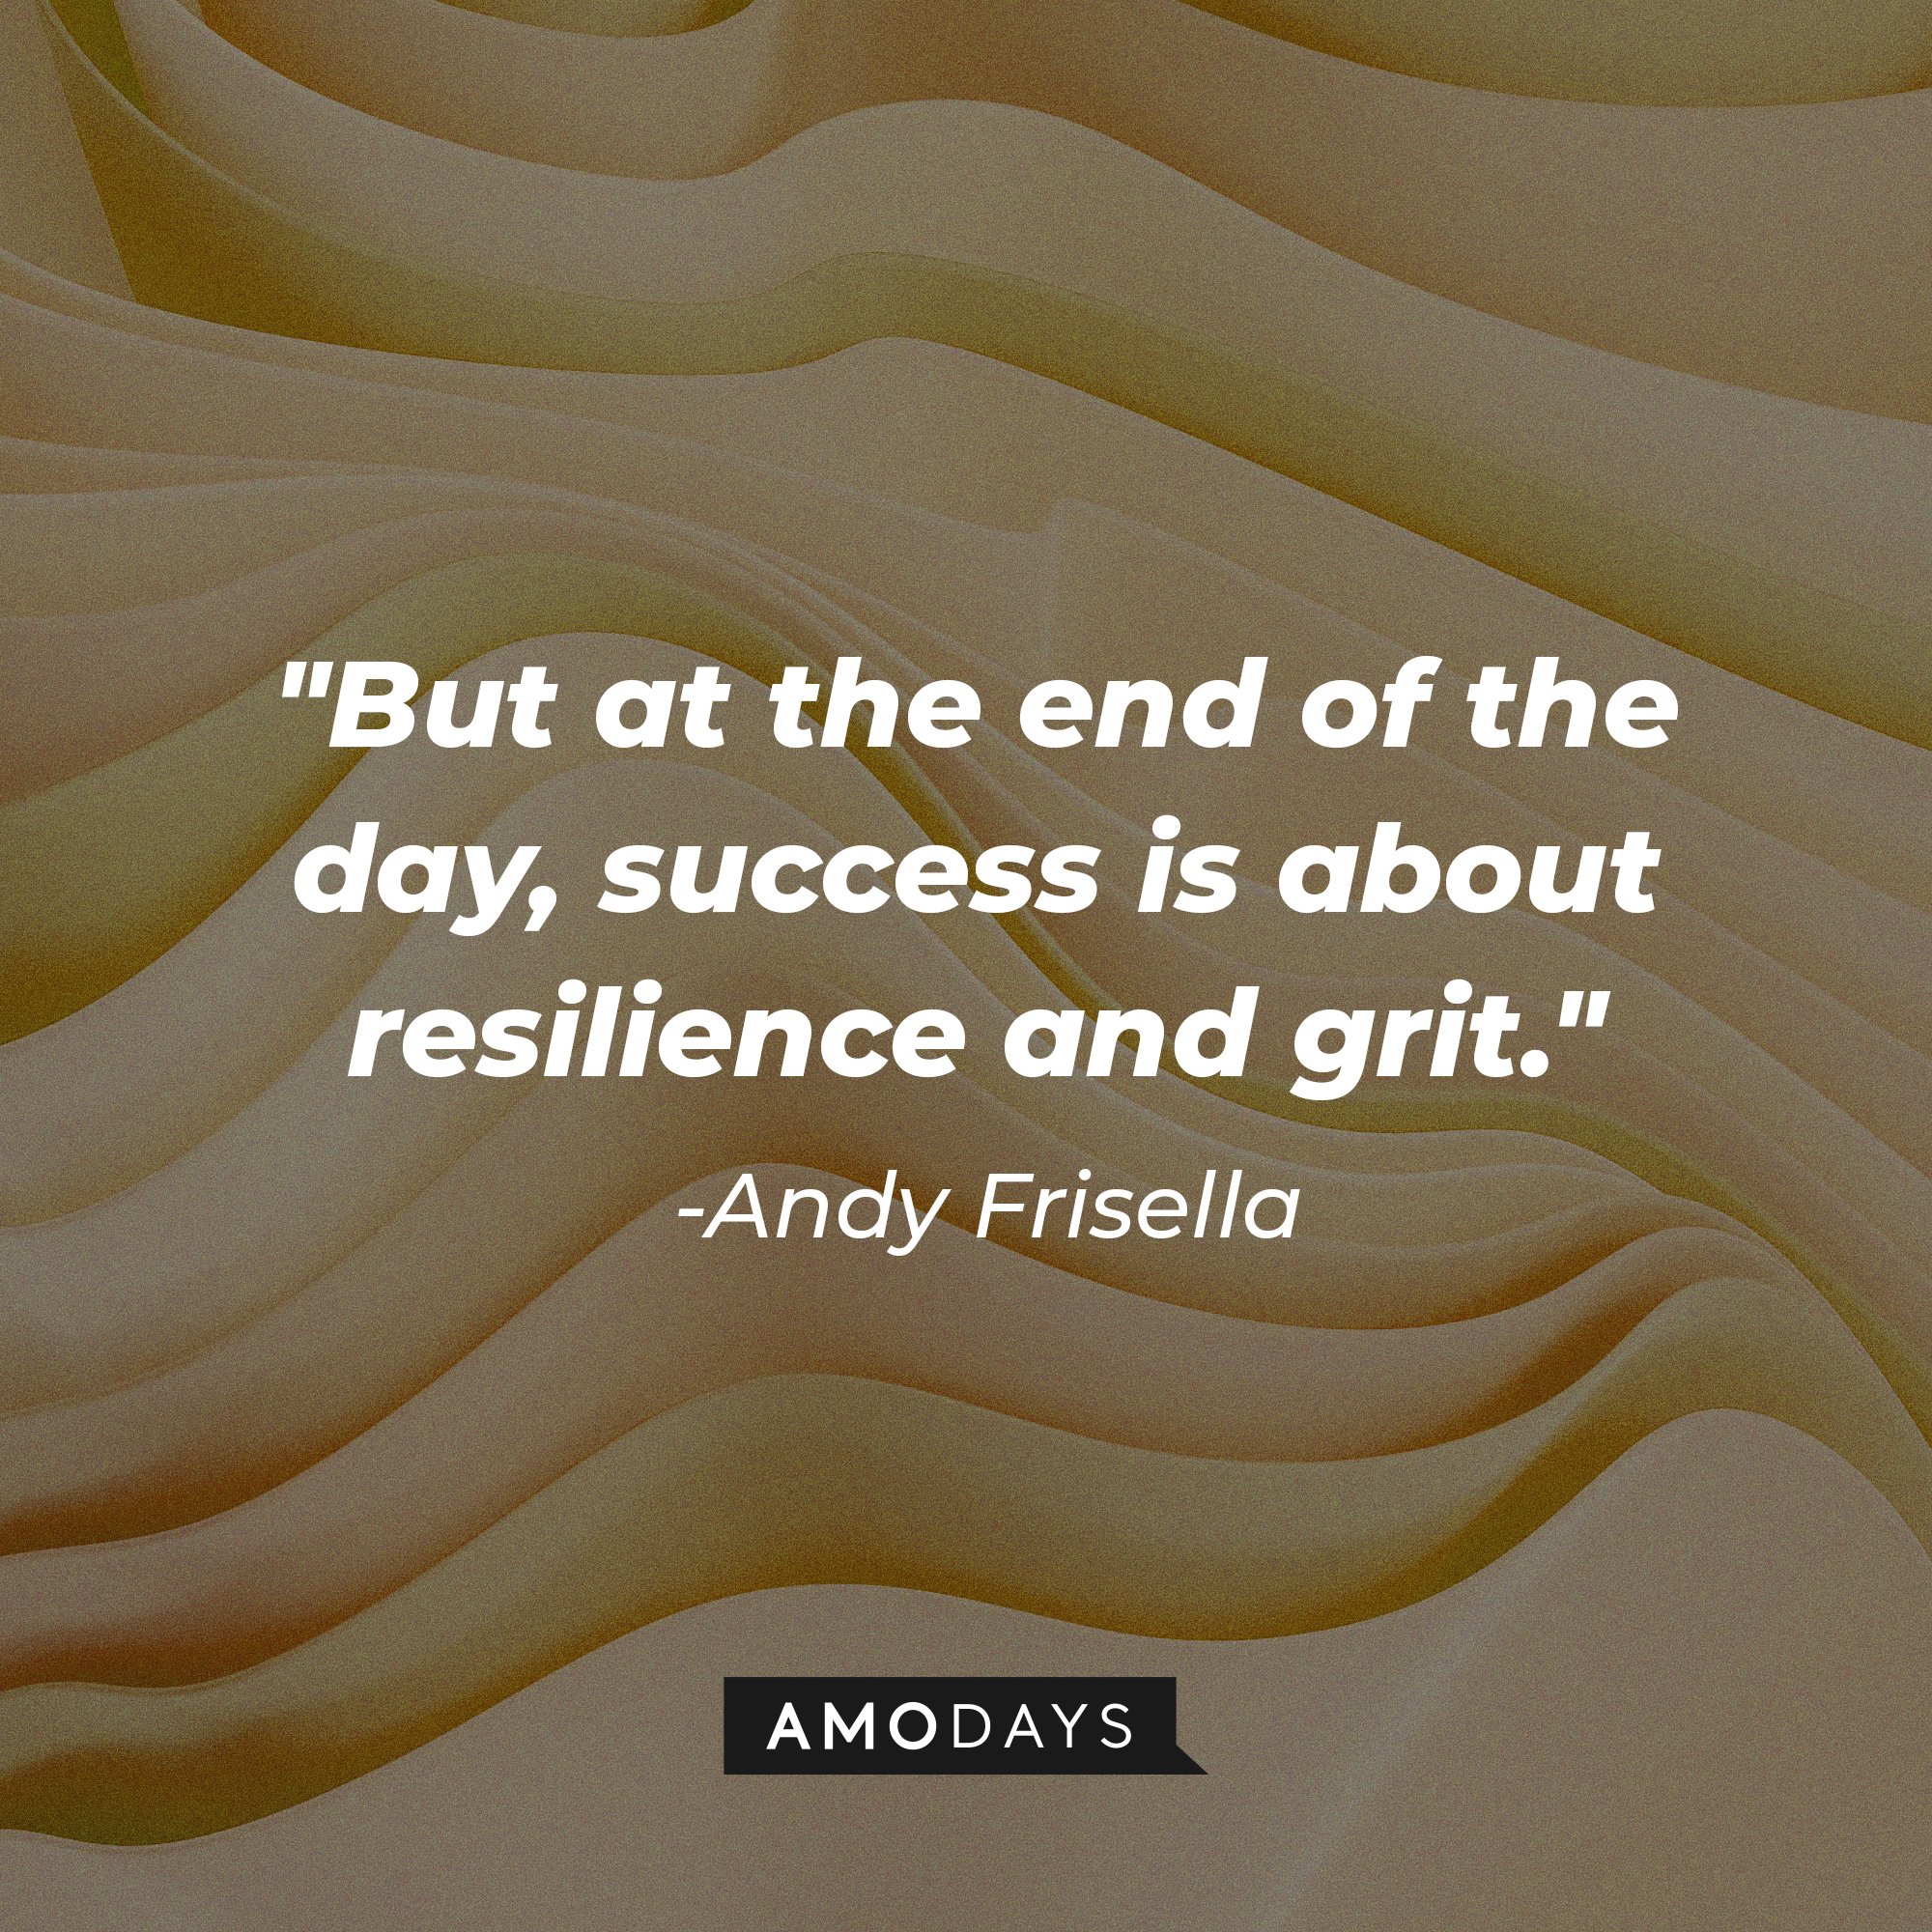 Andy Frisella's quote: "But at the end of the day, success is about resilience and grit." | Image: AmoDays